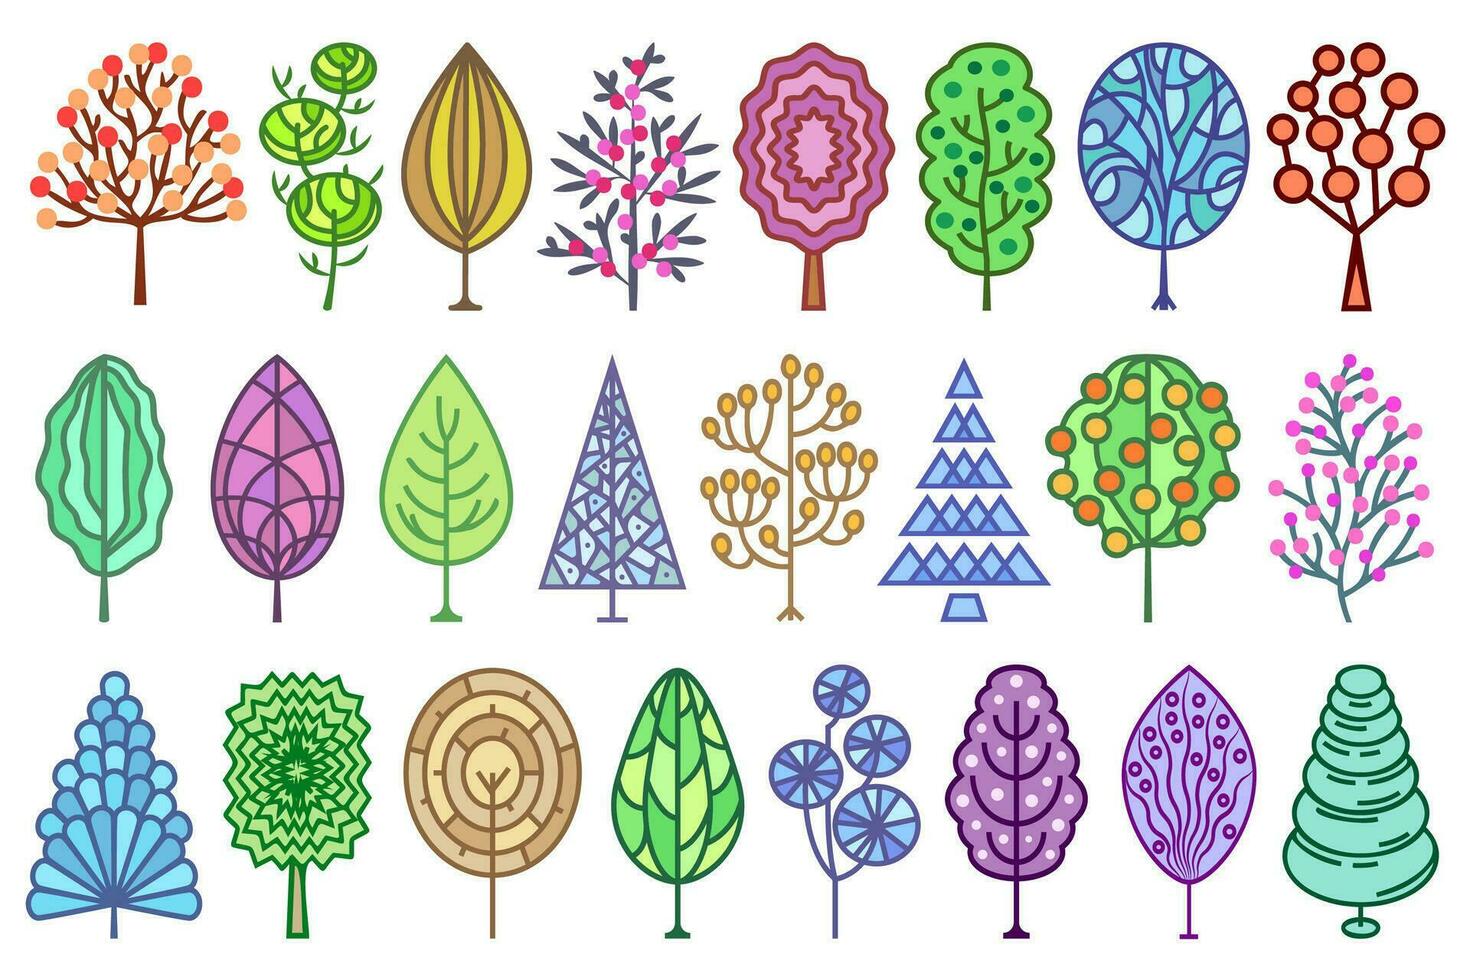 Vector set of colorful trees. Abstract decorative trees, colorful illustration collection. Nature decorative design elements.